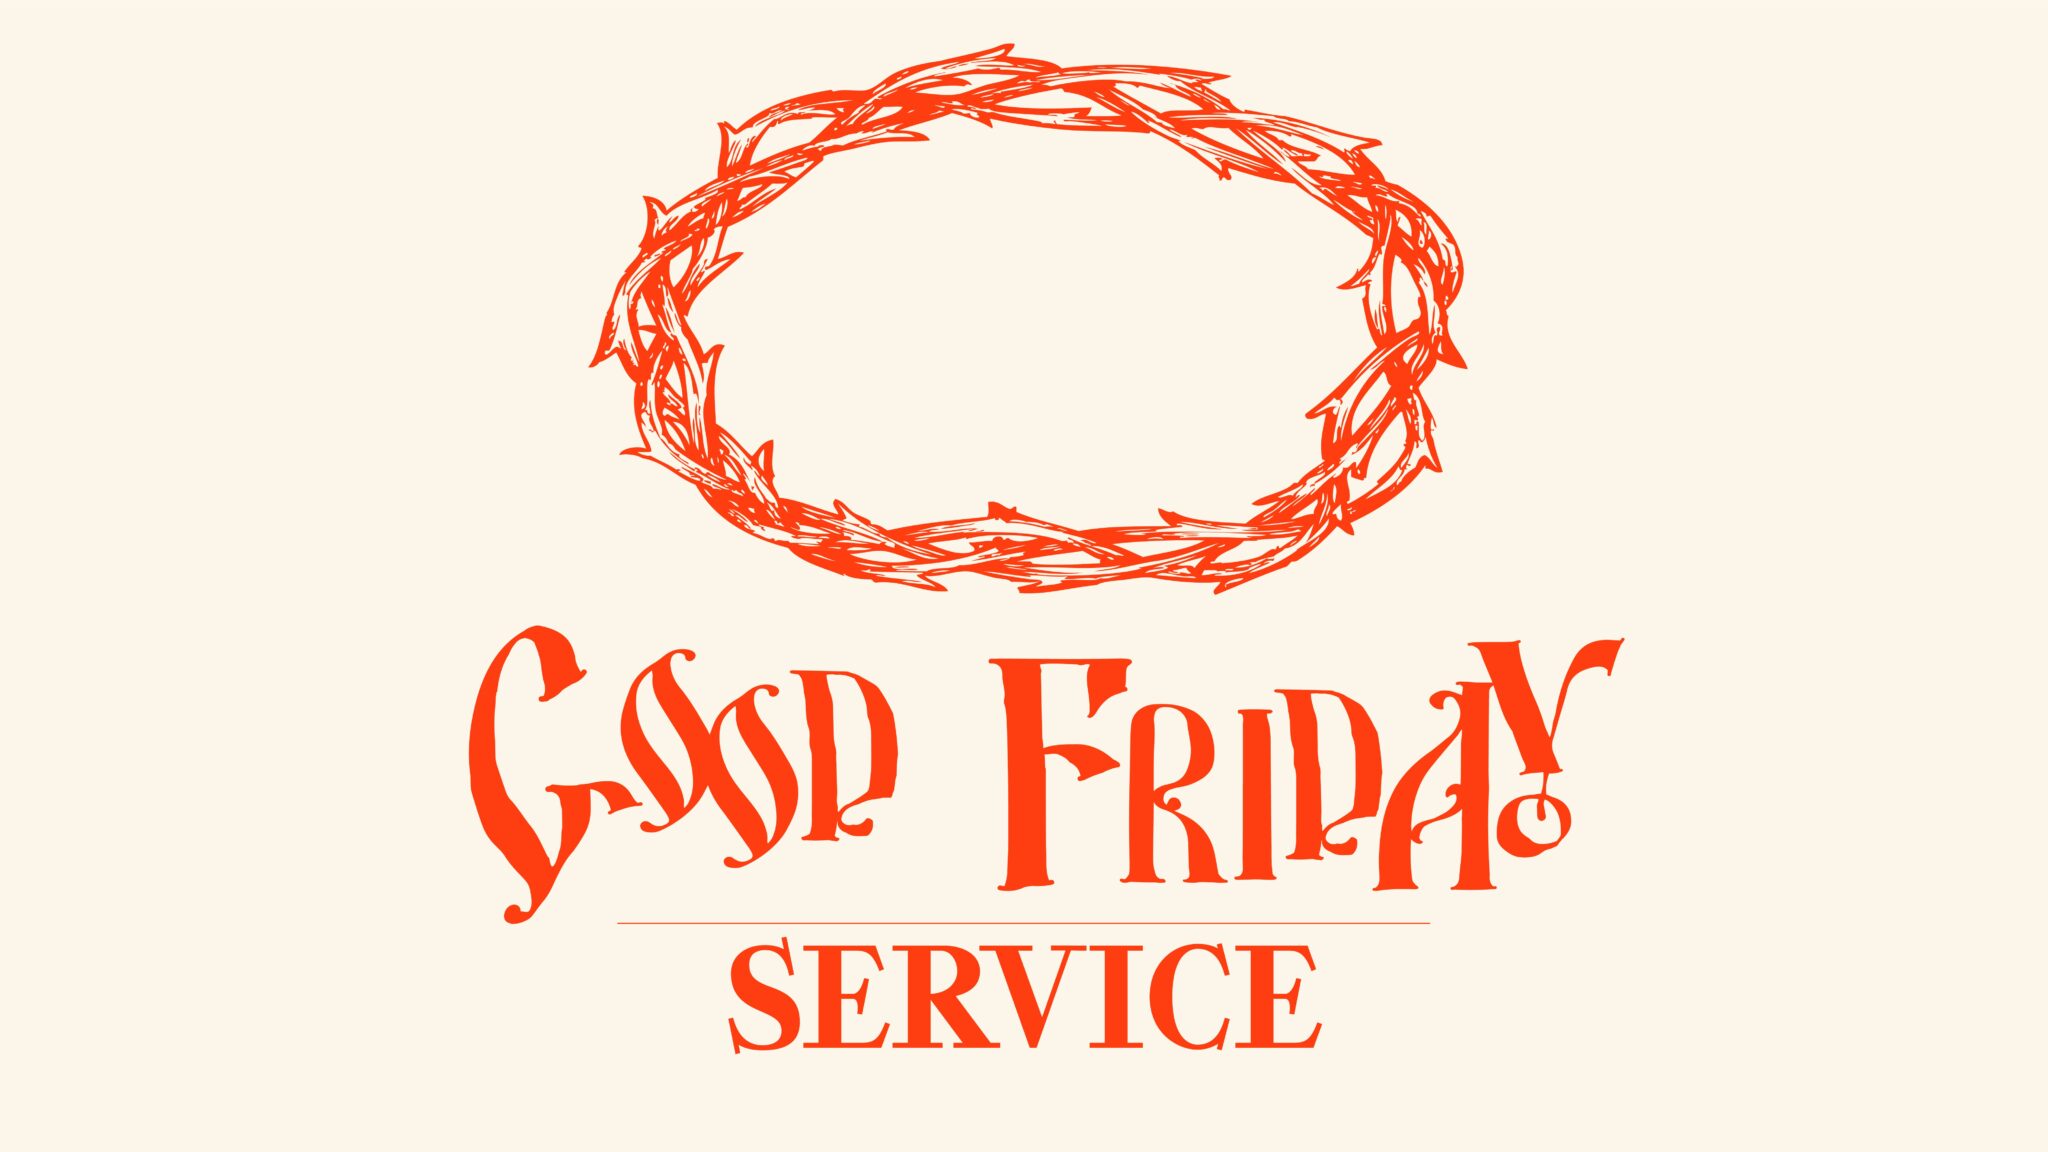 Good Friday Service graphic with the thorn crown above the text